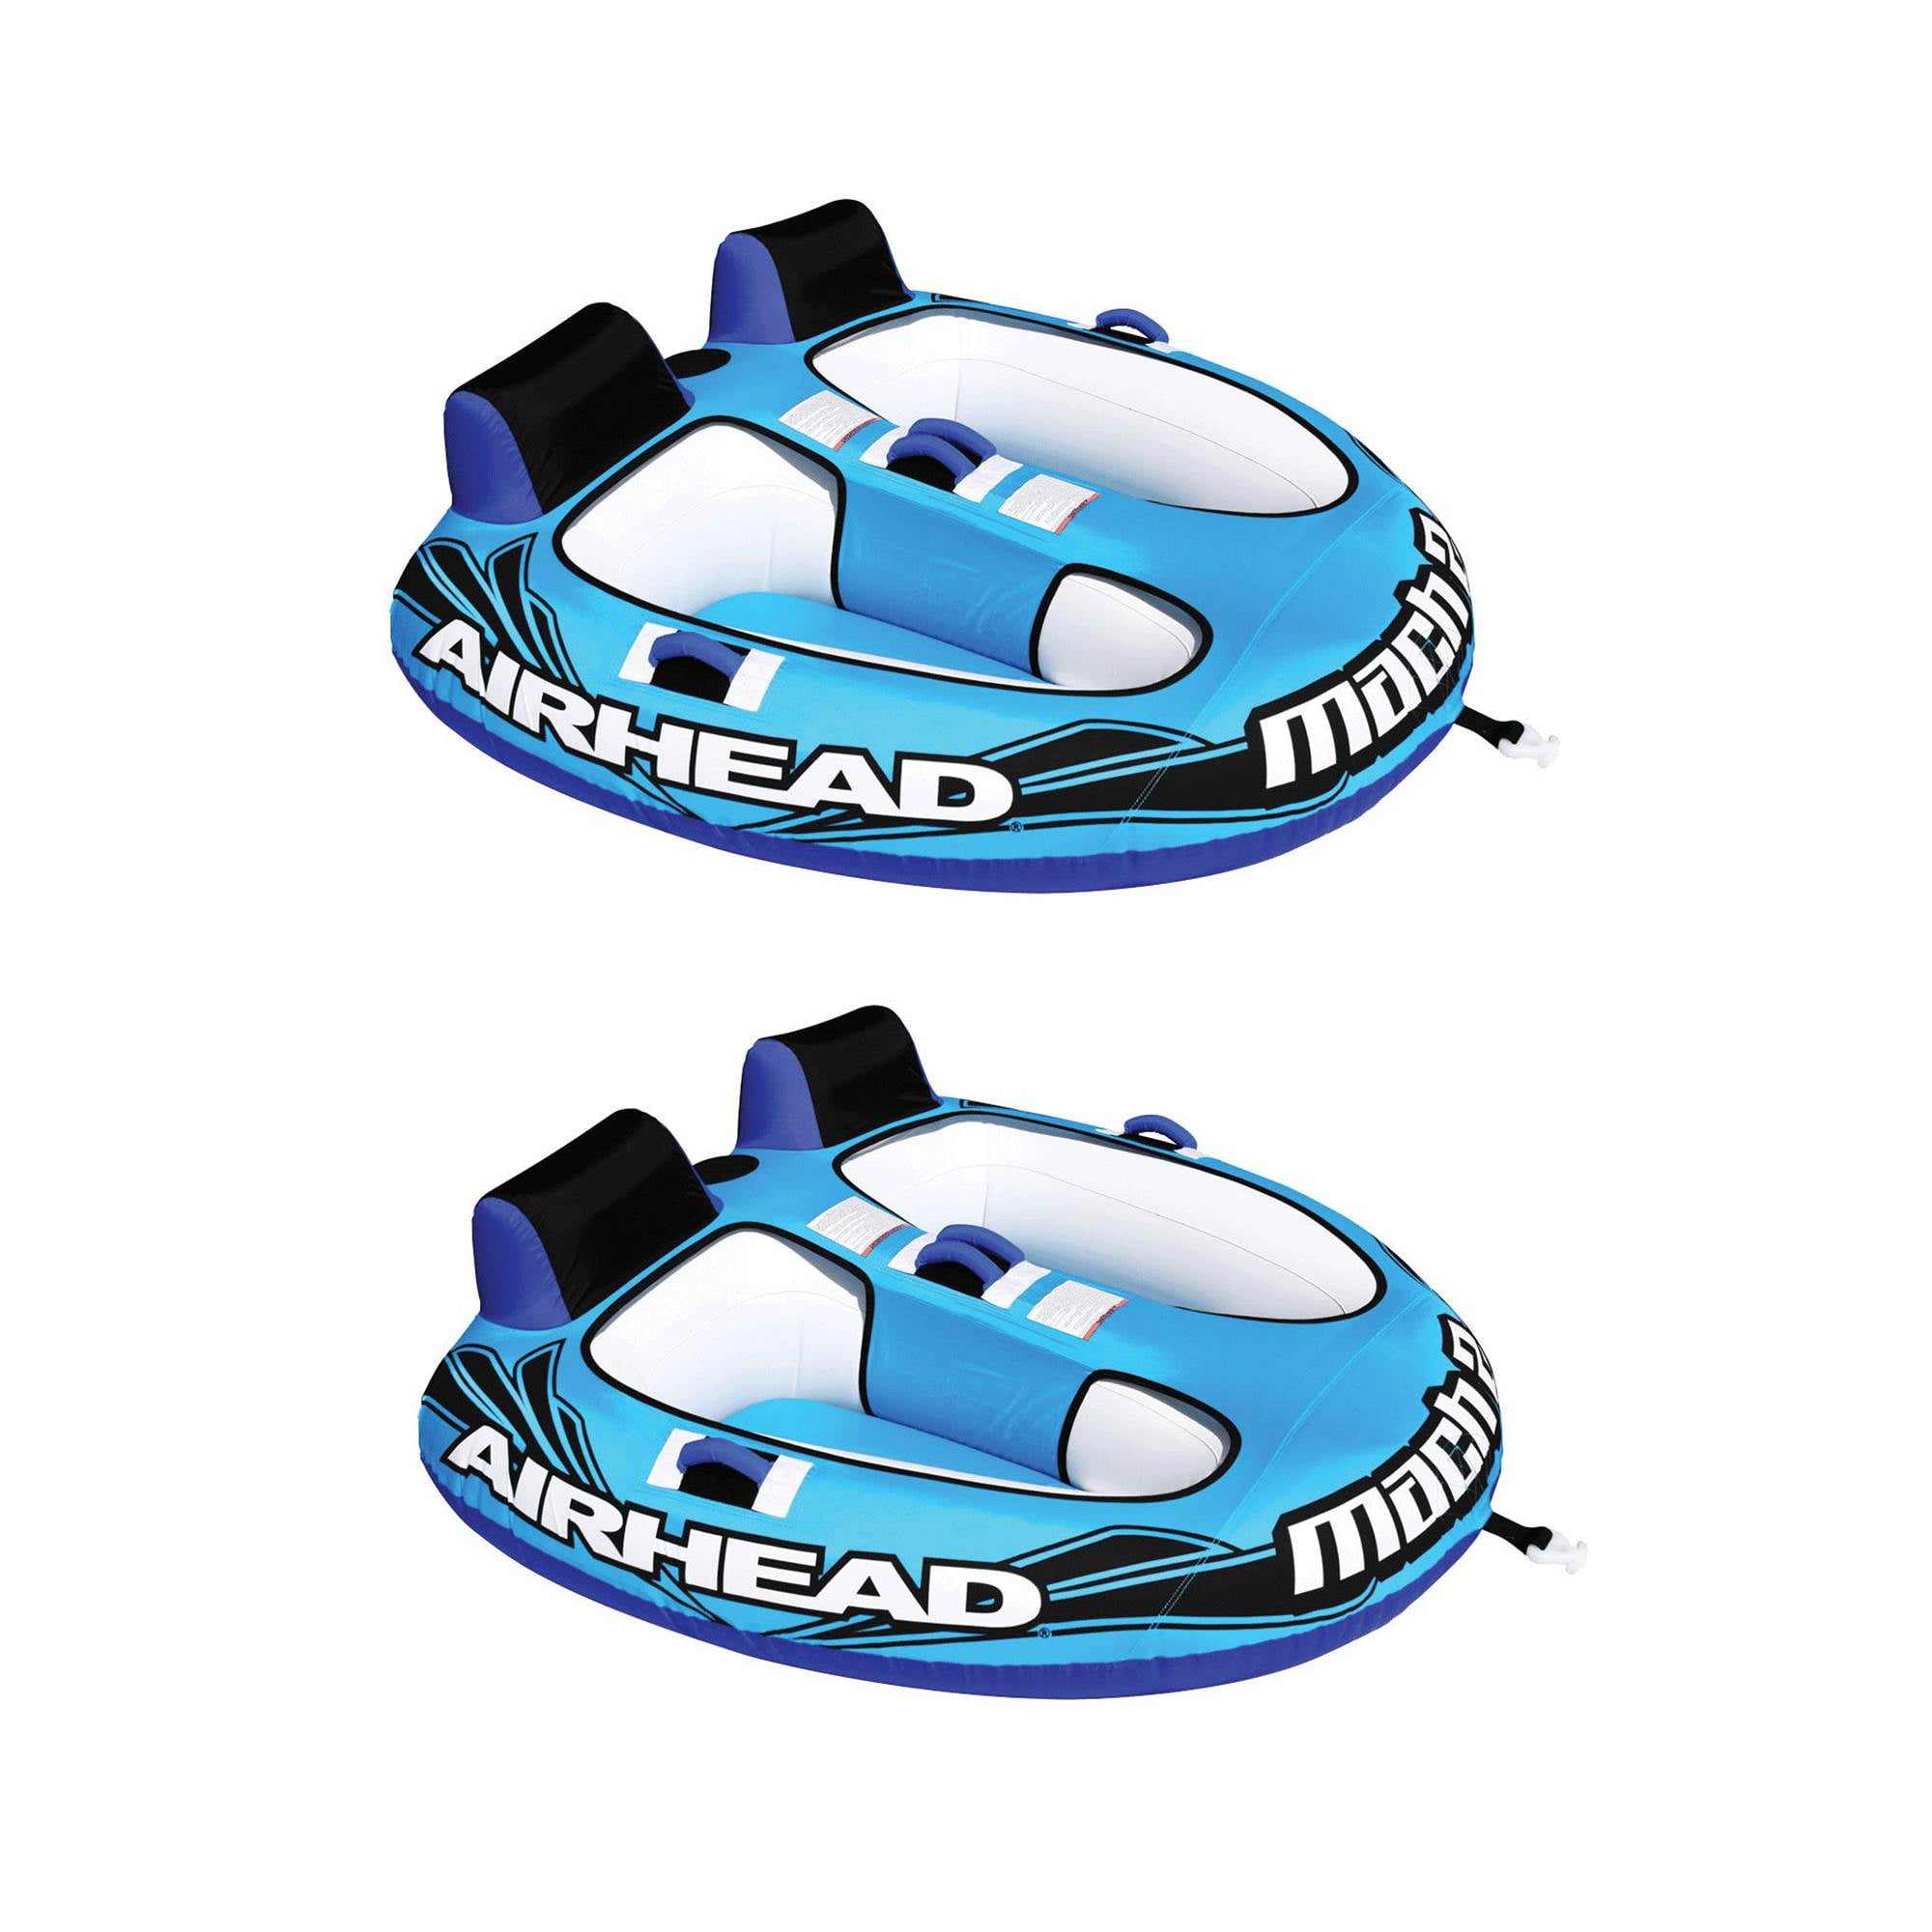 Double Inflatable Water Tube Floating Towable Rider Boat Ski Raft Lake 2 Person 